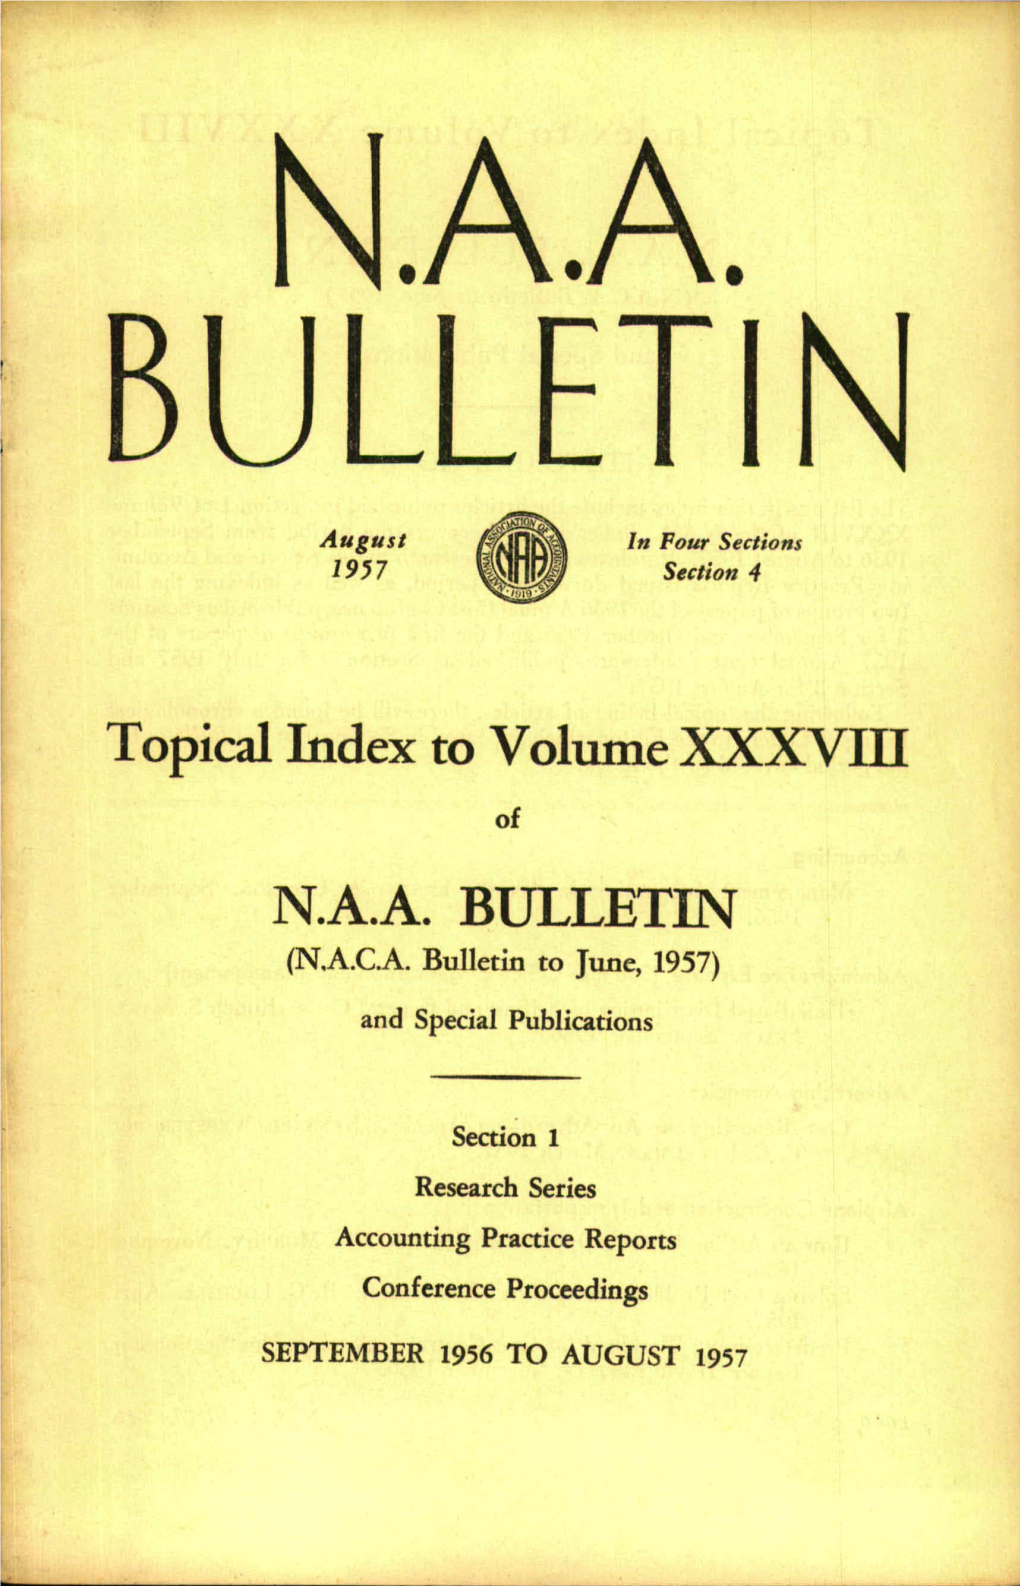 N.A.A. BULLETIN Au1957 G U S T ( (III�III��� P in Foursection Sections 4